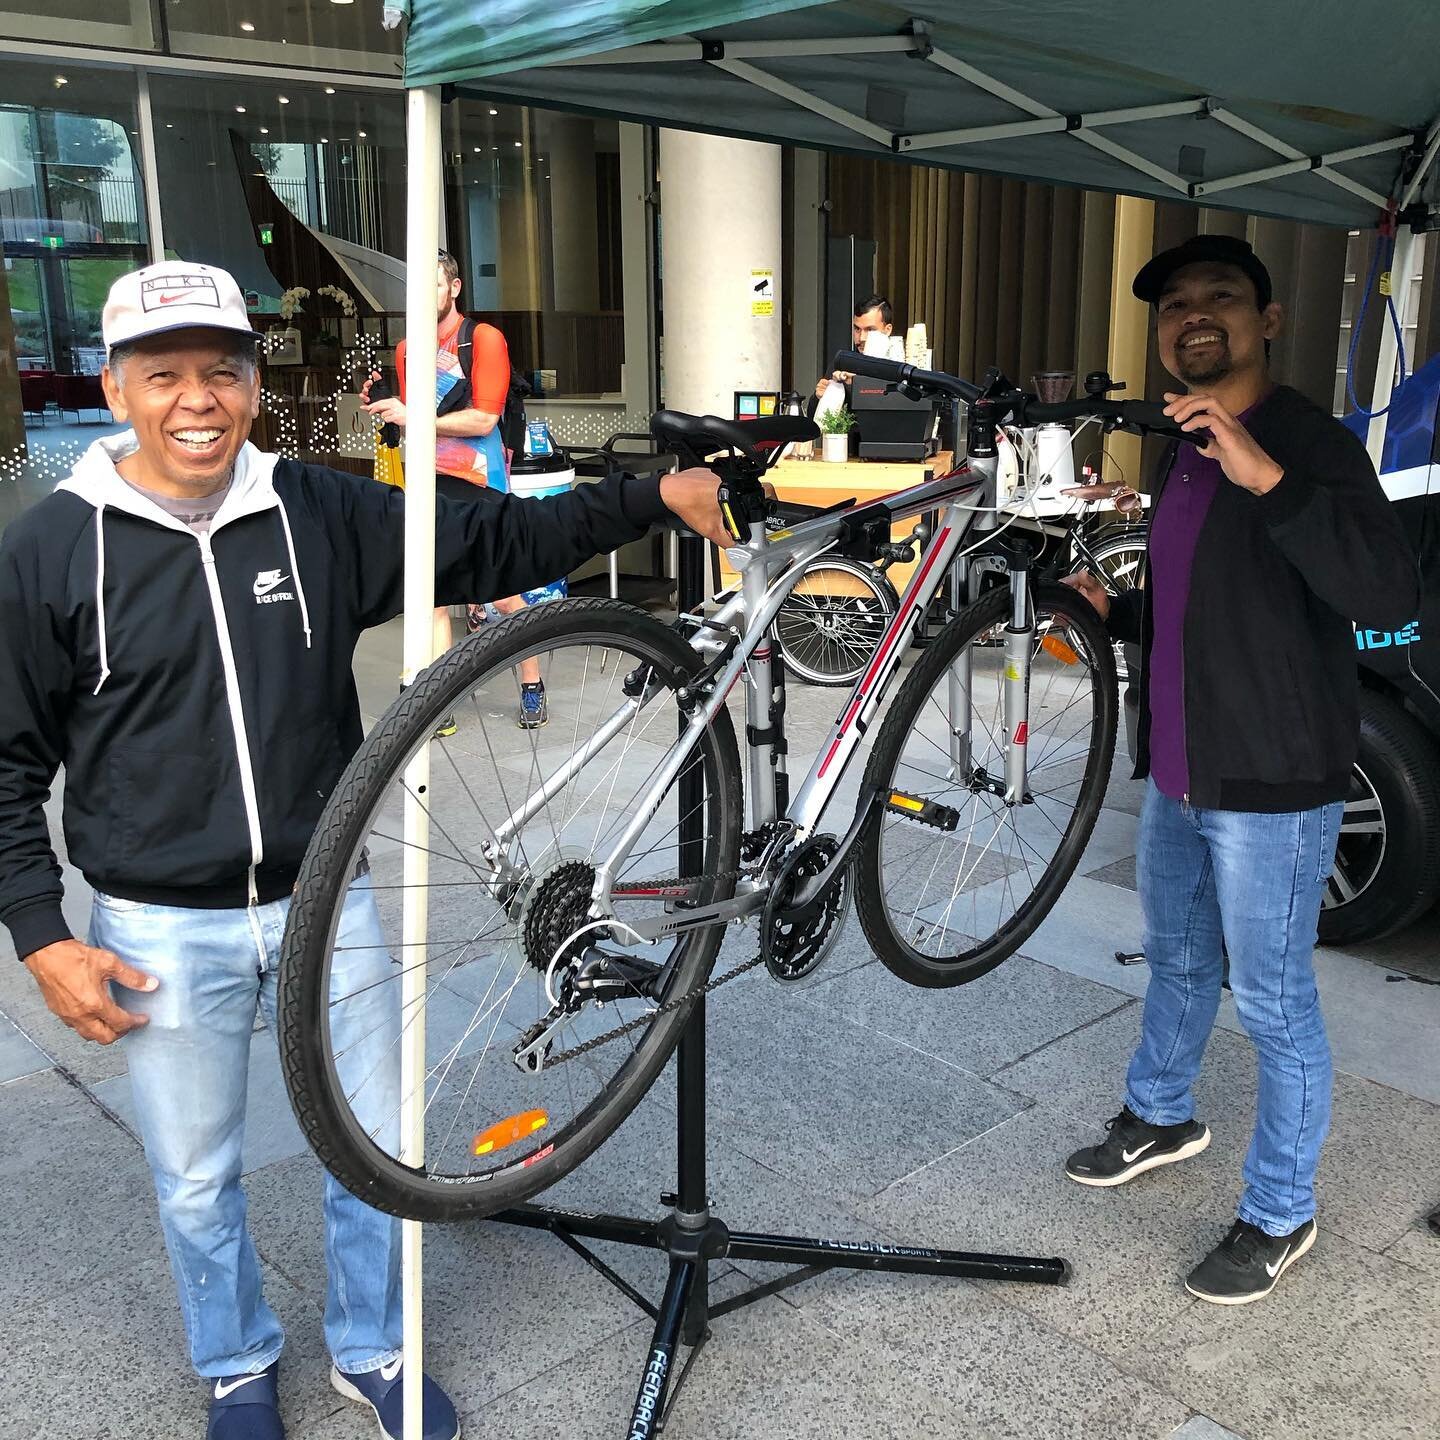 Happening now! The Big Bike Brekkie is ON! Come down to the Novartis building at 54 Waterloo Rd for complimentary bike tune ups, coffee, massage and prizes!
#macquariepark #macparklife